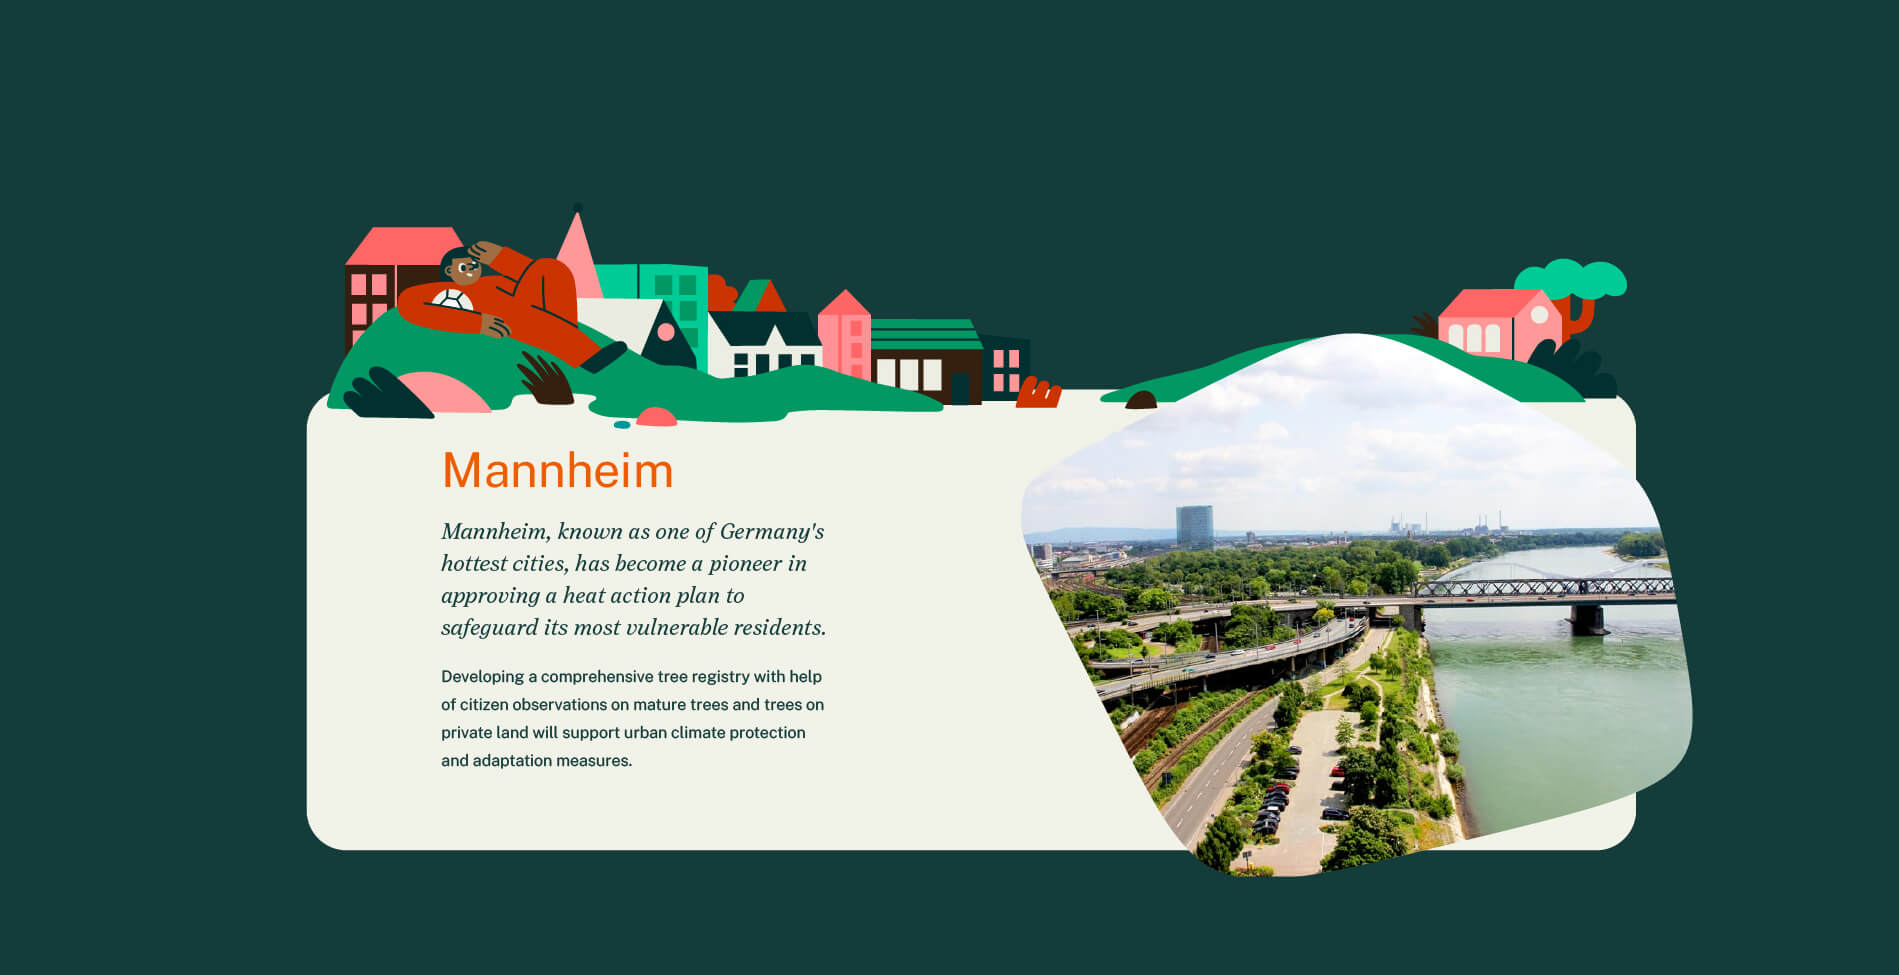 Summary of the project's pilot city Mannheim showing an image of the river.